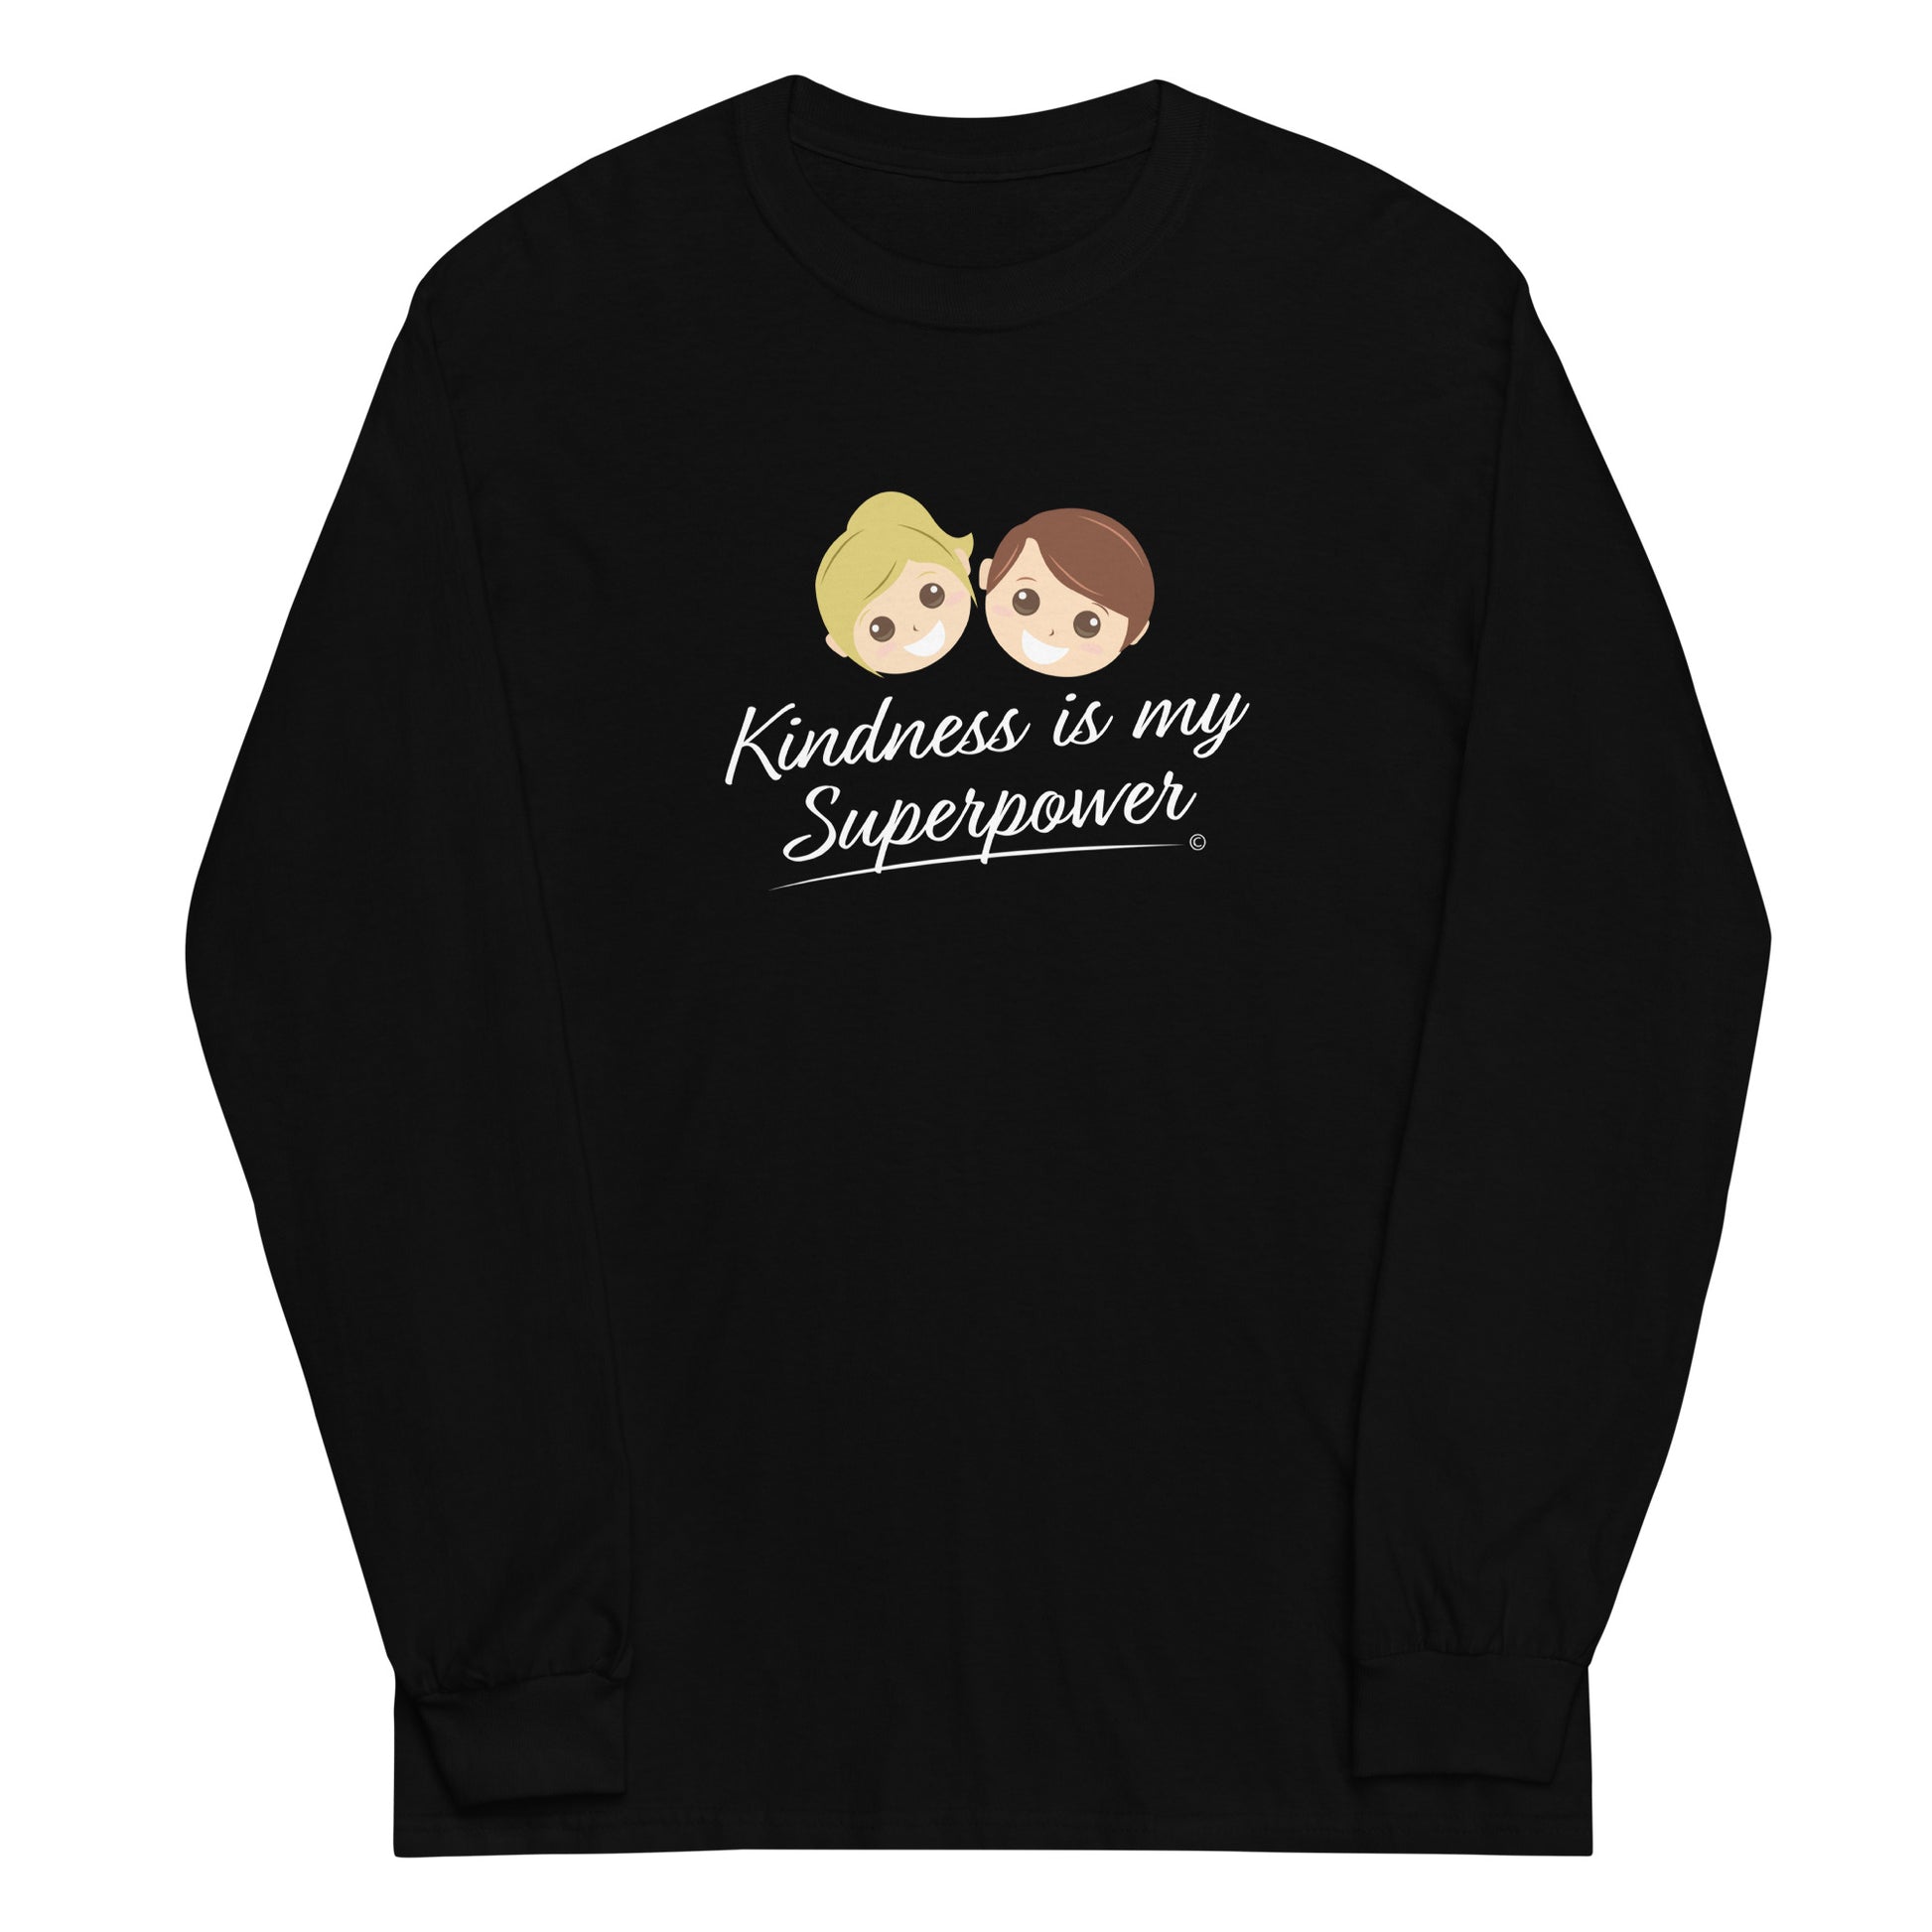 A stylish long sleeve shirt in black featuring the empowering quote 'Kindness is my Superpower' in bold lettering.